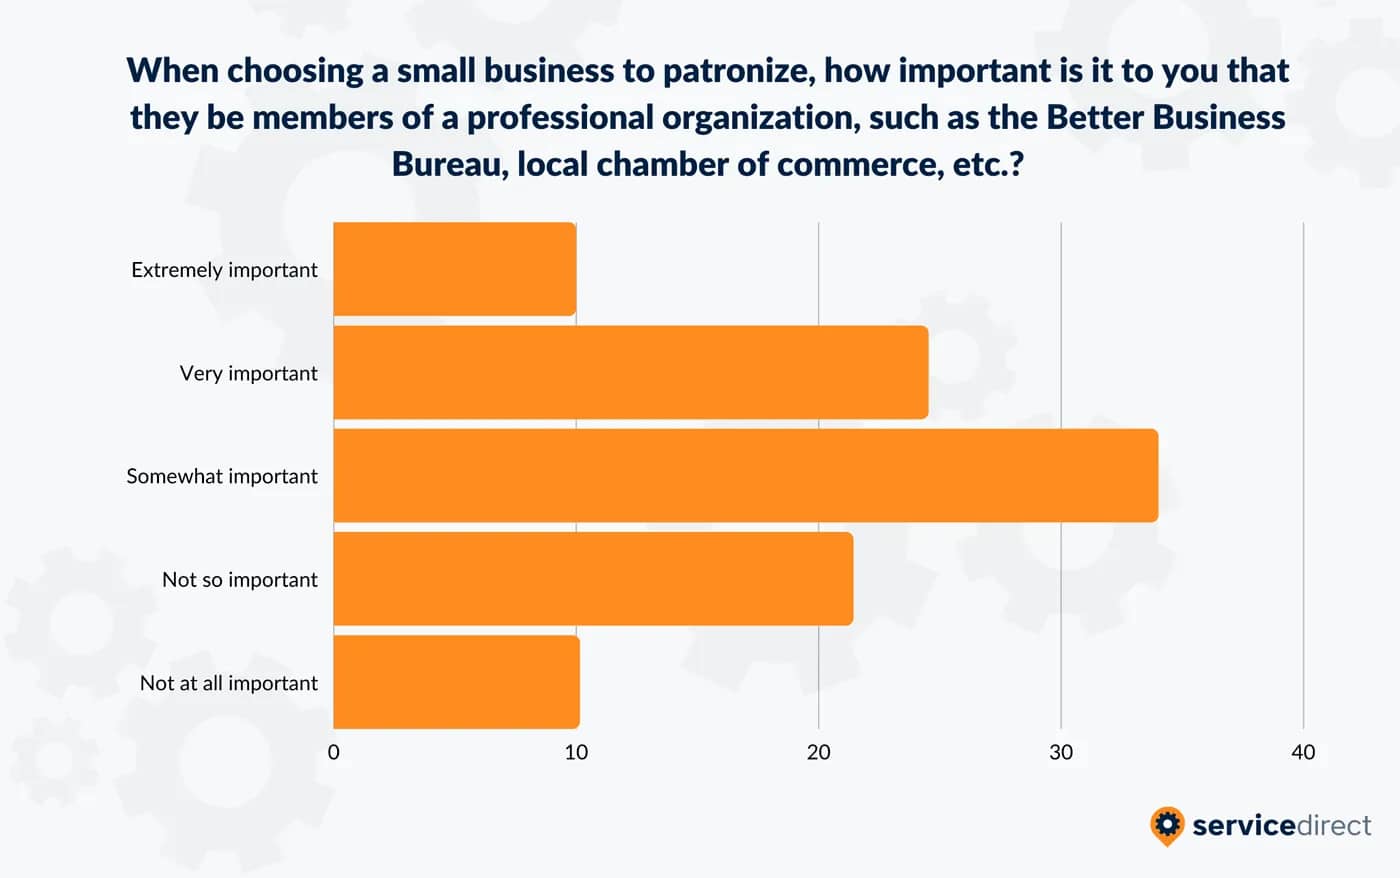 A majority of consumers report that membership of local organizations is important. 